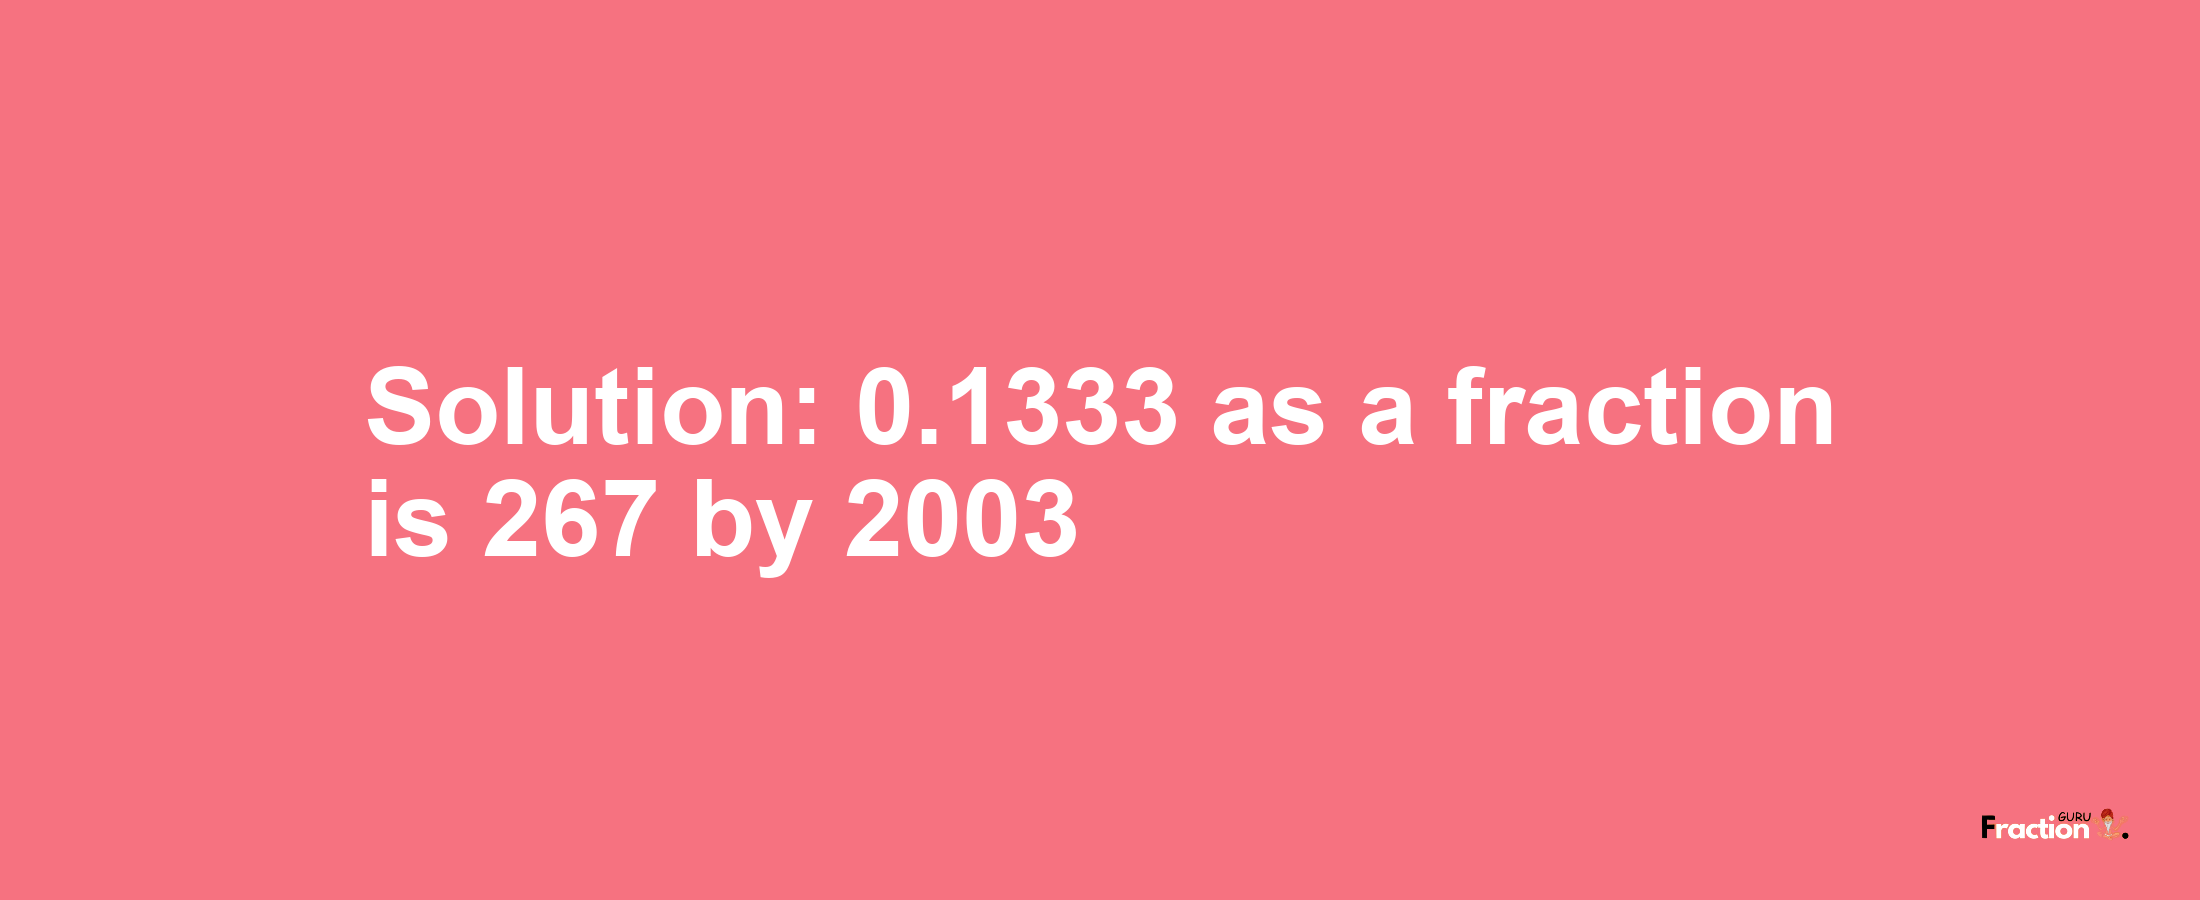 Solution:0.1333 as a fraction is 267/2003